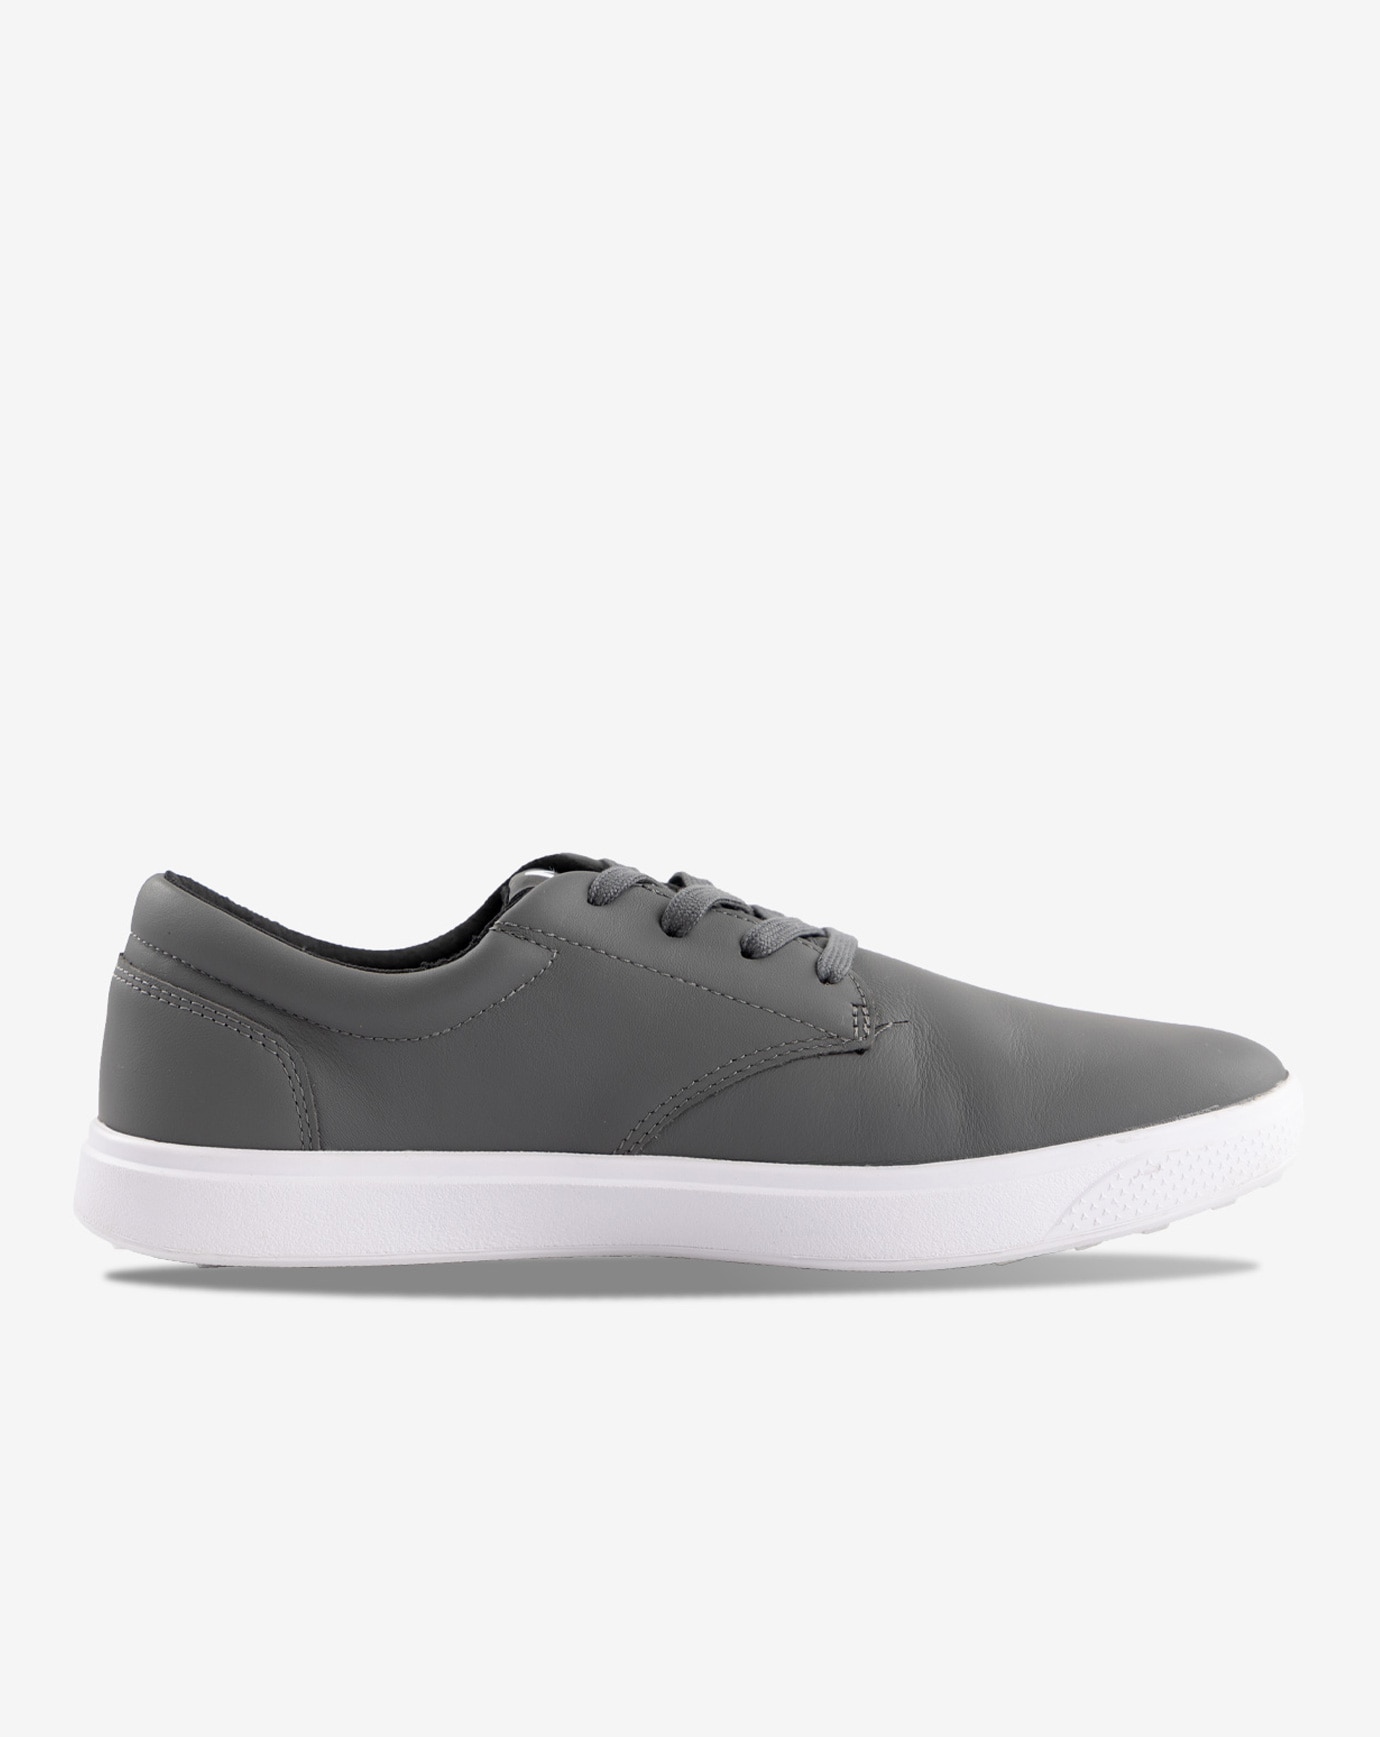 THE WILDCARD LEATHER SPIKELESS GOLF SHOE Image Thumbnail 3